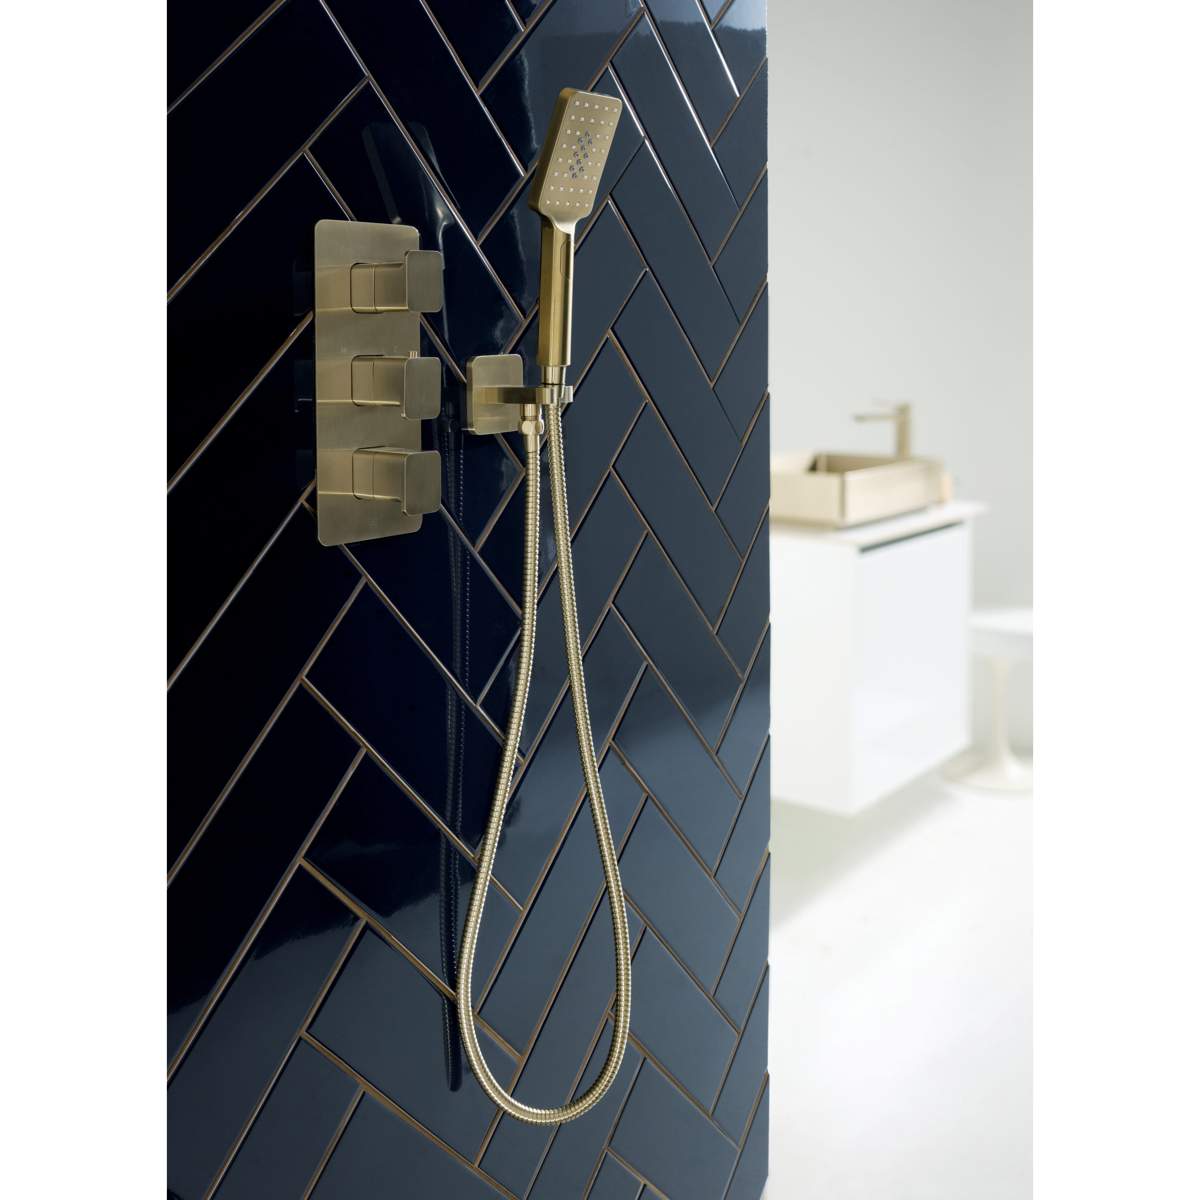 JTP Hix Brushed Brass Square Water Outlet with Holder, Hose and Hand Shower (33SQUARE/WS/BBR)